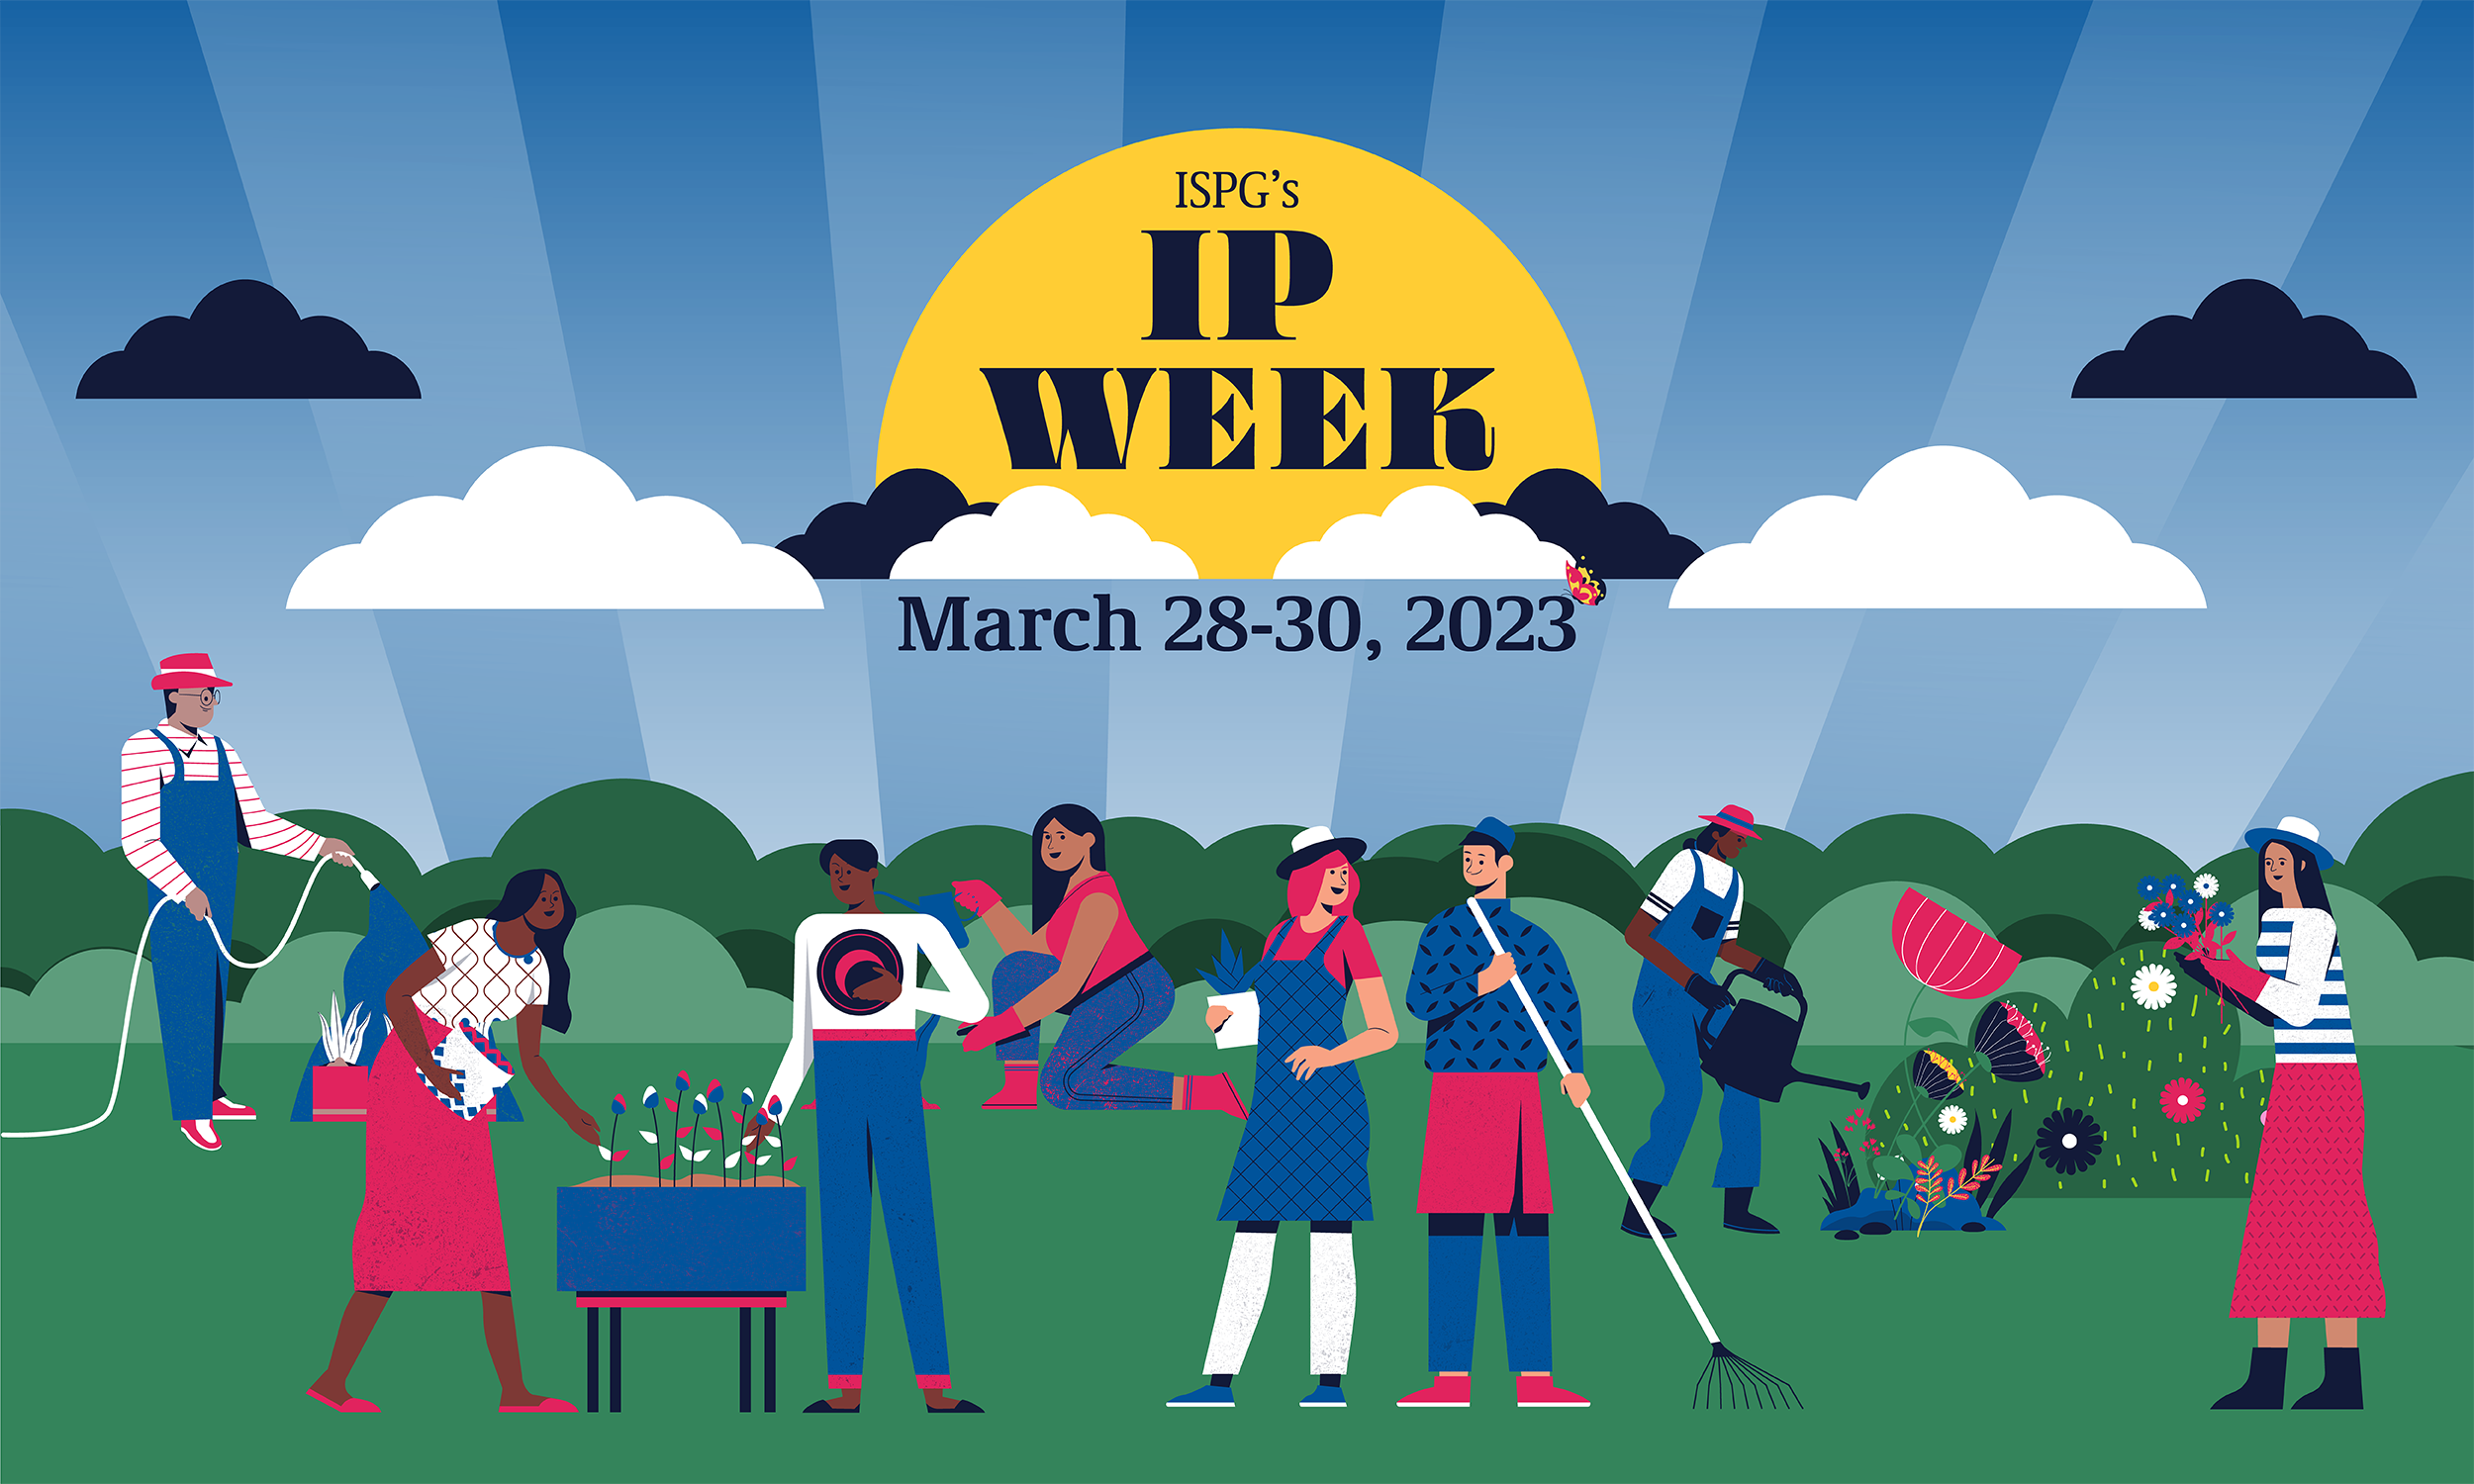 Graphic of group of people gardening under partly cloudy skies with text reading "ISPG's IP Week, March 28-30, 2023